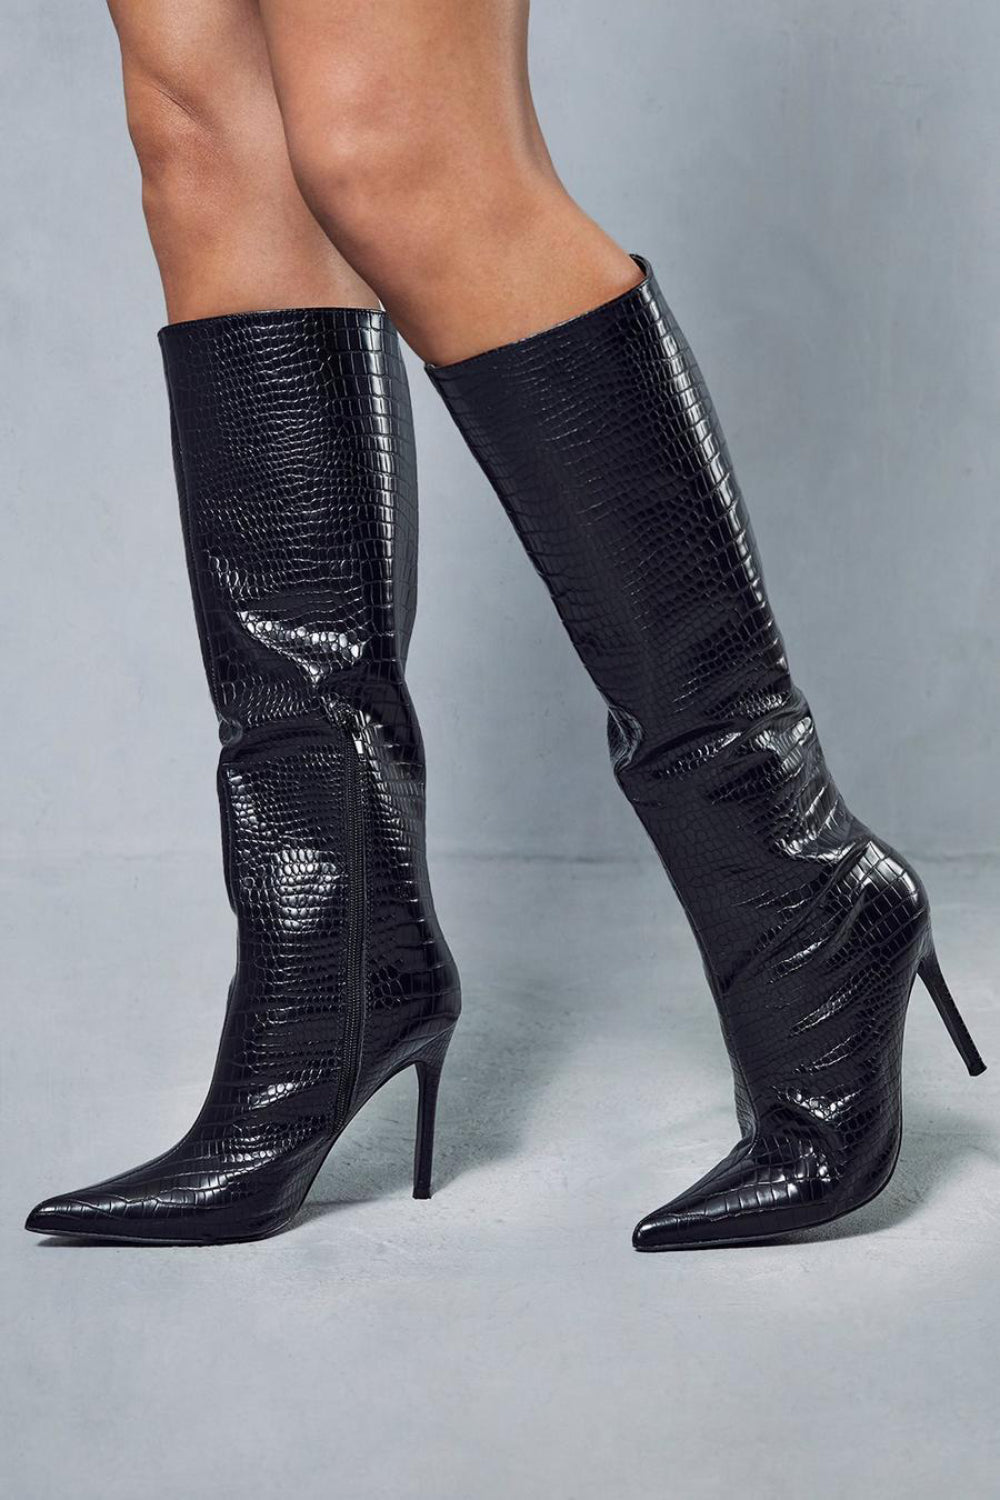 Black Croc High Heel Calf Boots With Pointed Toe